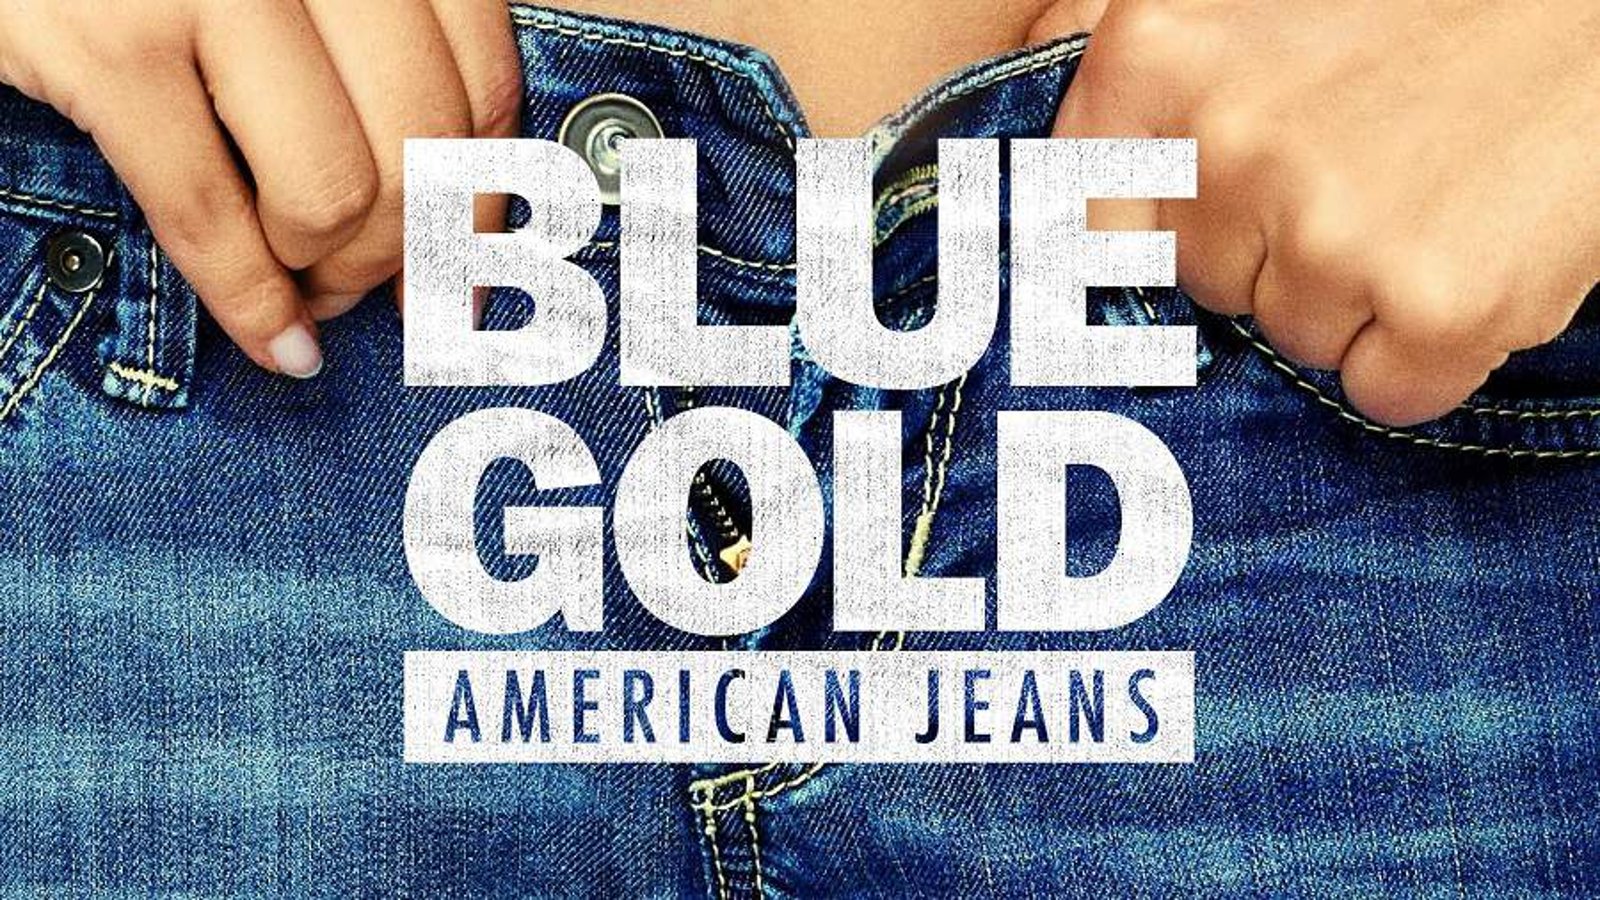 Blue Gold: American Jeans - A History of Blue Jeans